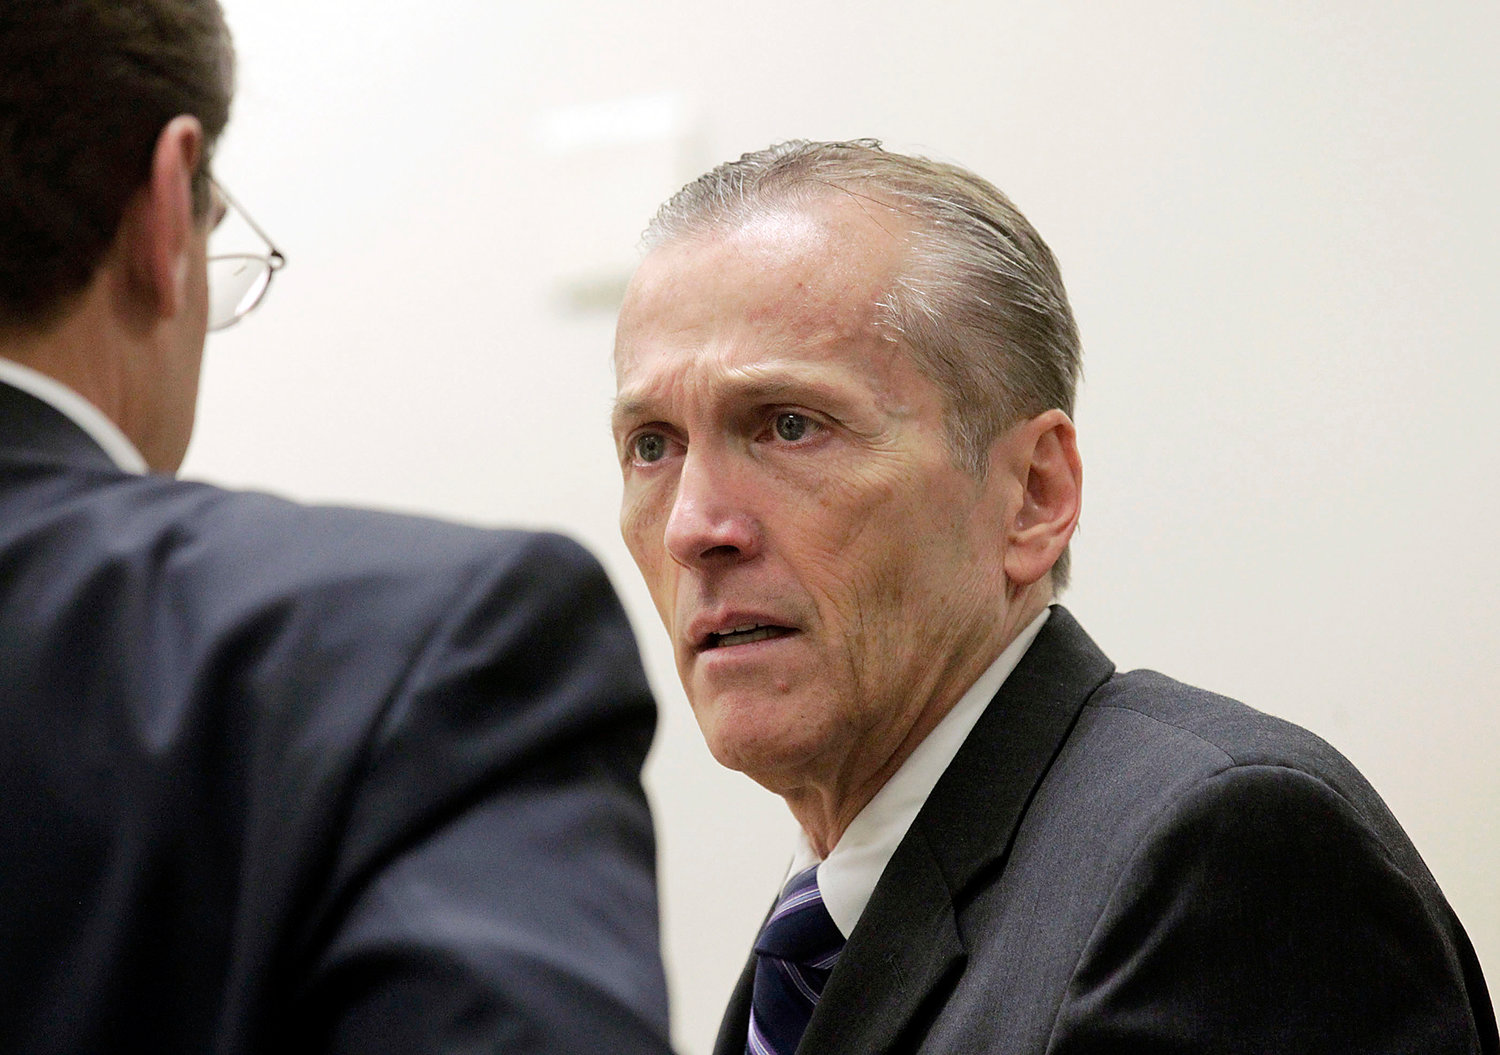 Pleasant Grove physician Martin MacNeill, charged with murder for allegedly killing his wife, Michele MacNeill in 2007, speaks with his defense lawyer Randy Spencerr, during his murder trial in Provo, Utah, Friday Nov. 1, 2013. The murder trial of the Utah doctor charged in his wife's death resumed Friday with testimony from medical experts about how they believe the 50-year-old woman died. (AP Photo/The Salt Lake Tribune, Al Hartmann, Pool)